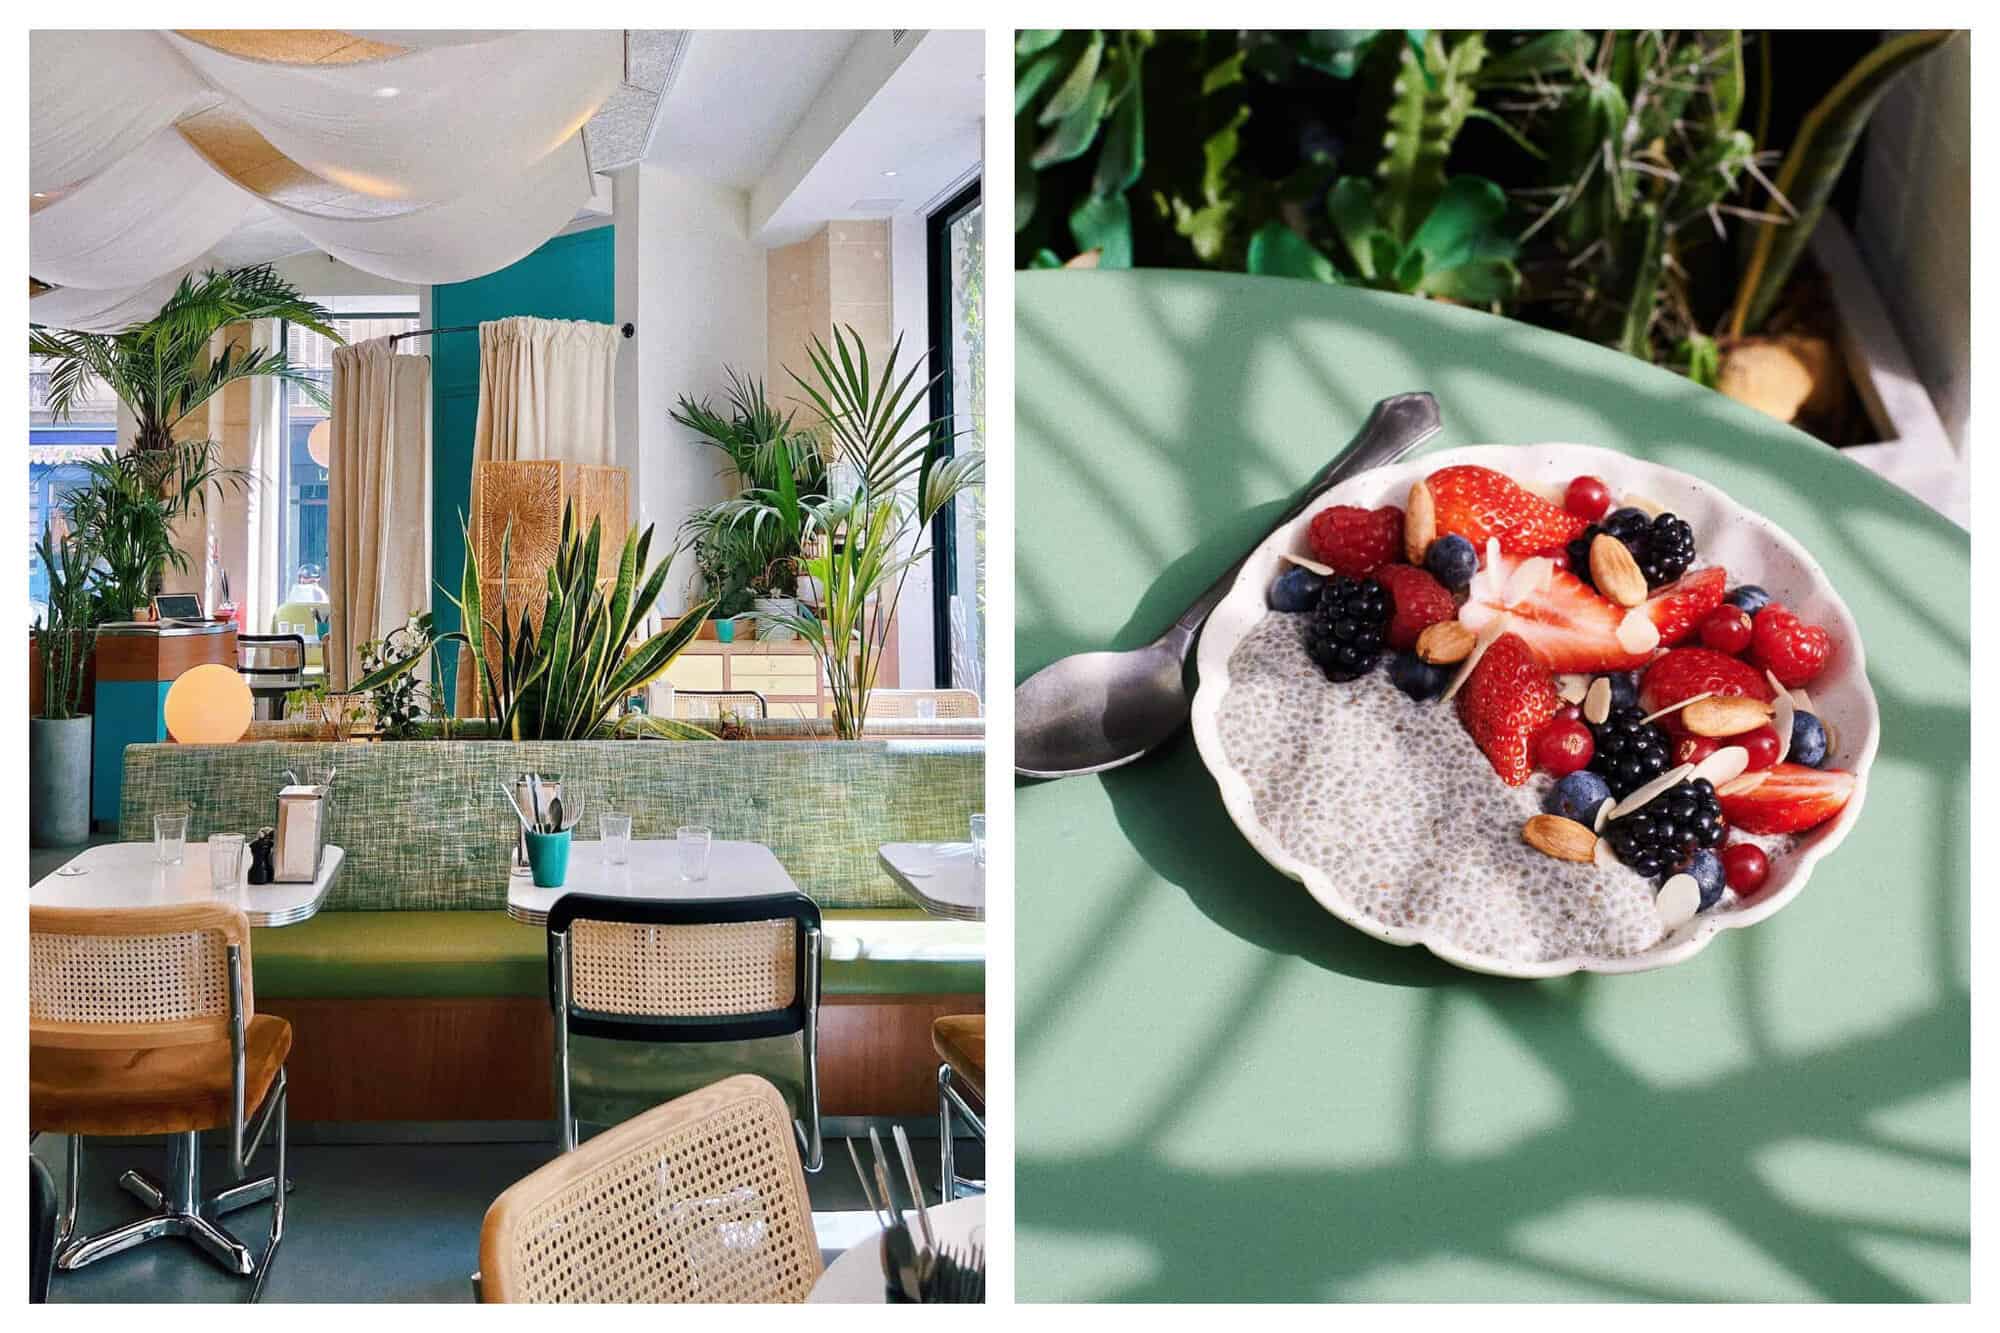 (Left) The interior of Cali Sisters restaurant with white and blue walls, green chairs, and green plants. (Right) A smoothie bowl from Cali Sisters, filled with strawberries, nuts, blueberries and raspberries on top of a mint colored table next to a silver spoon. 